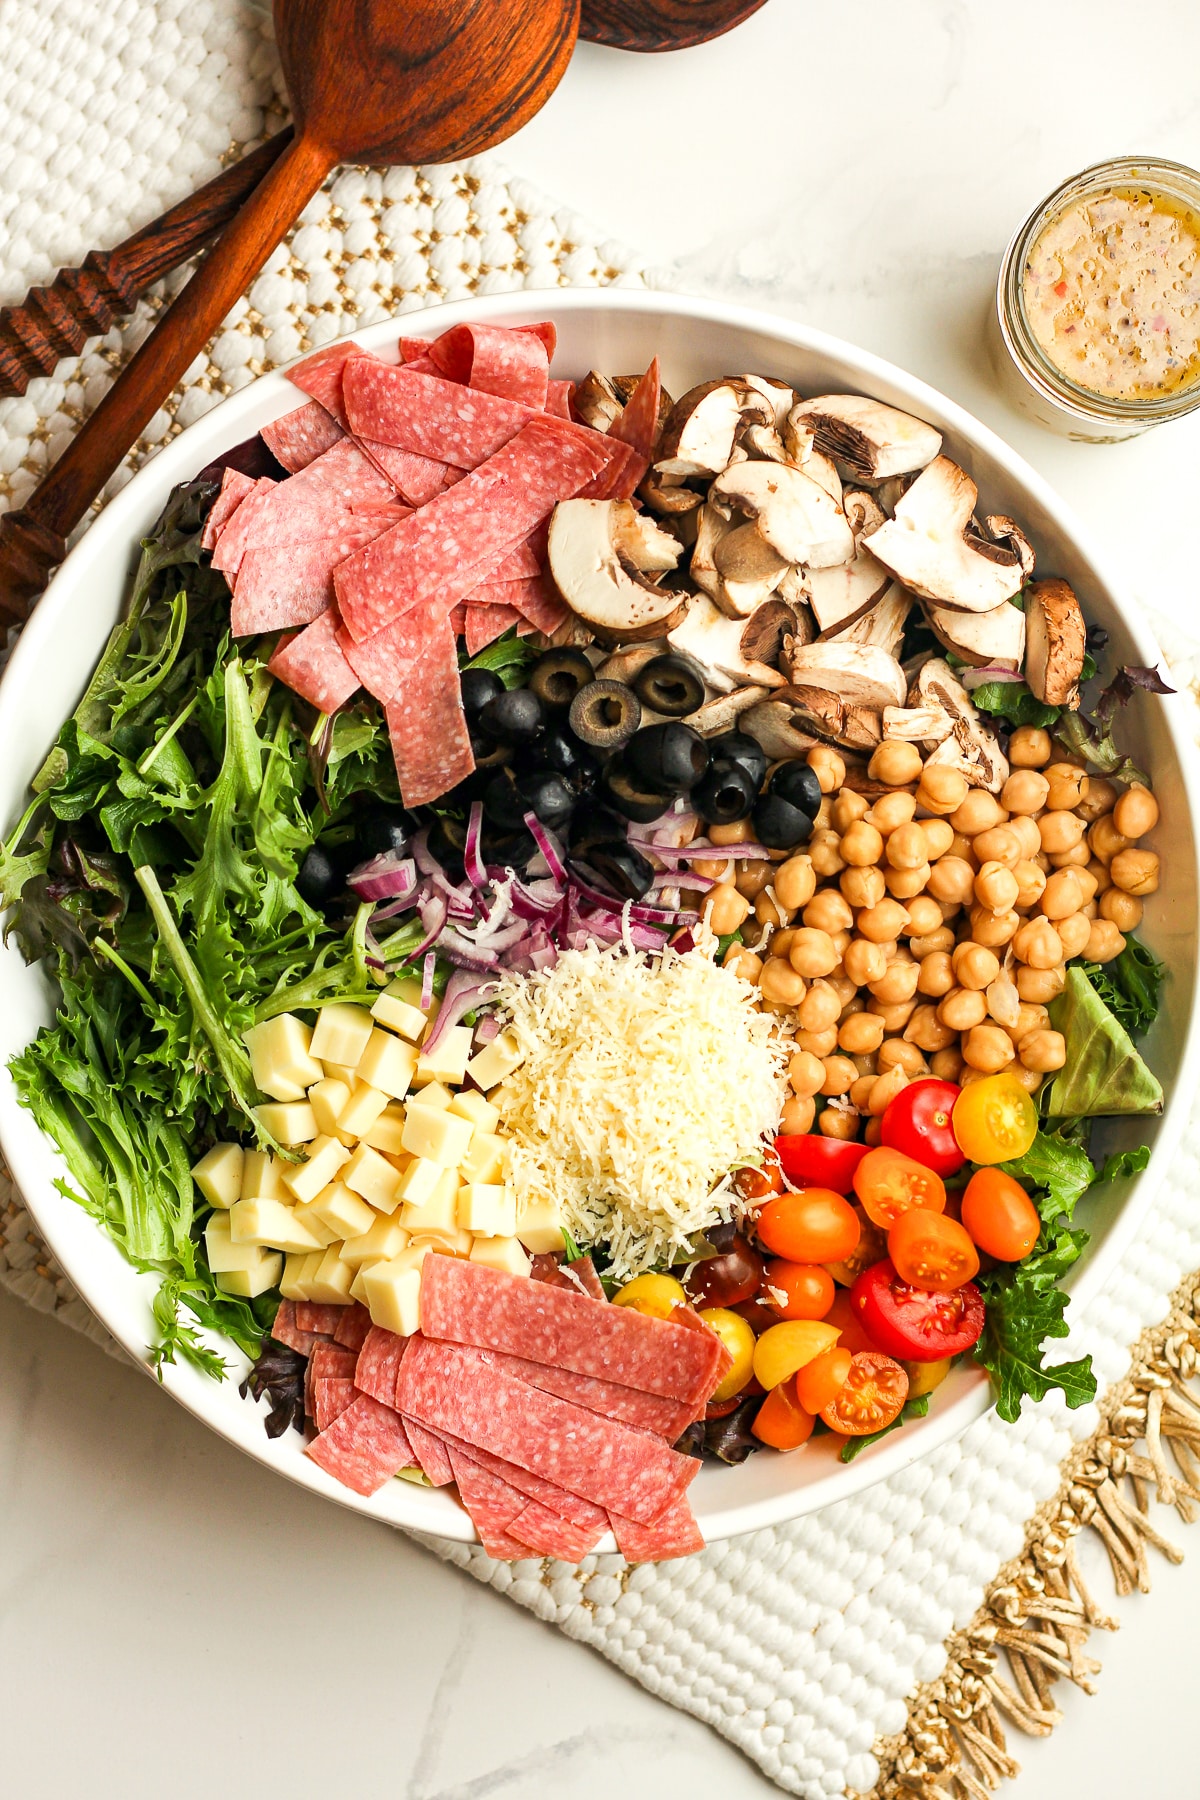 A large bowl of the salad ingredients separated by ingredient.